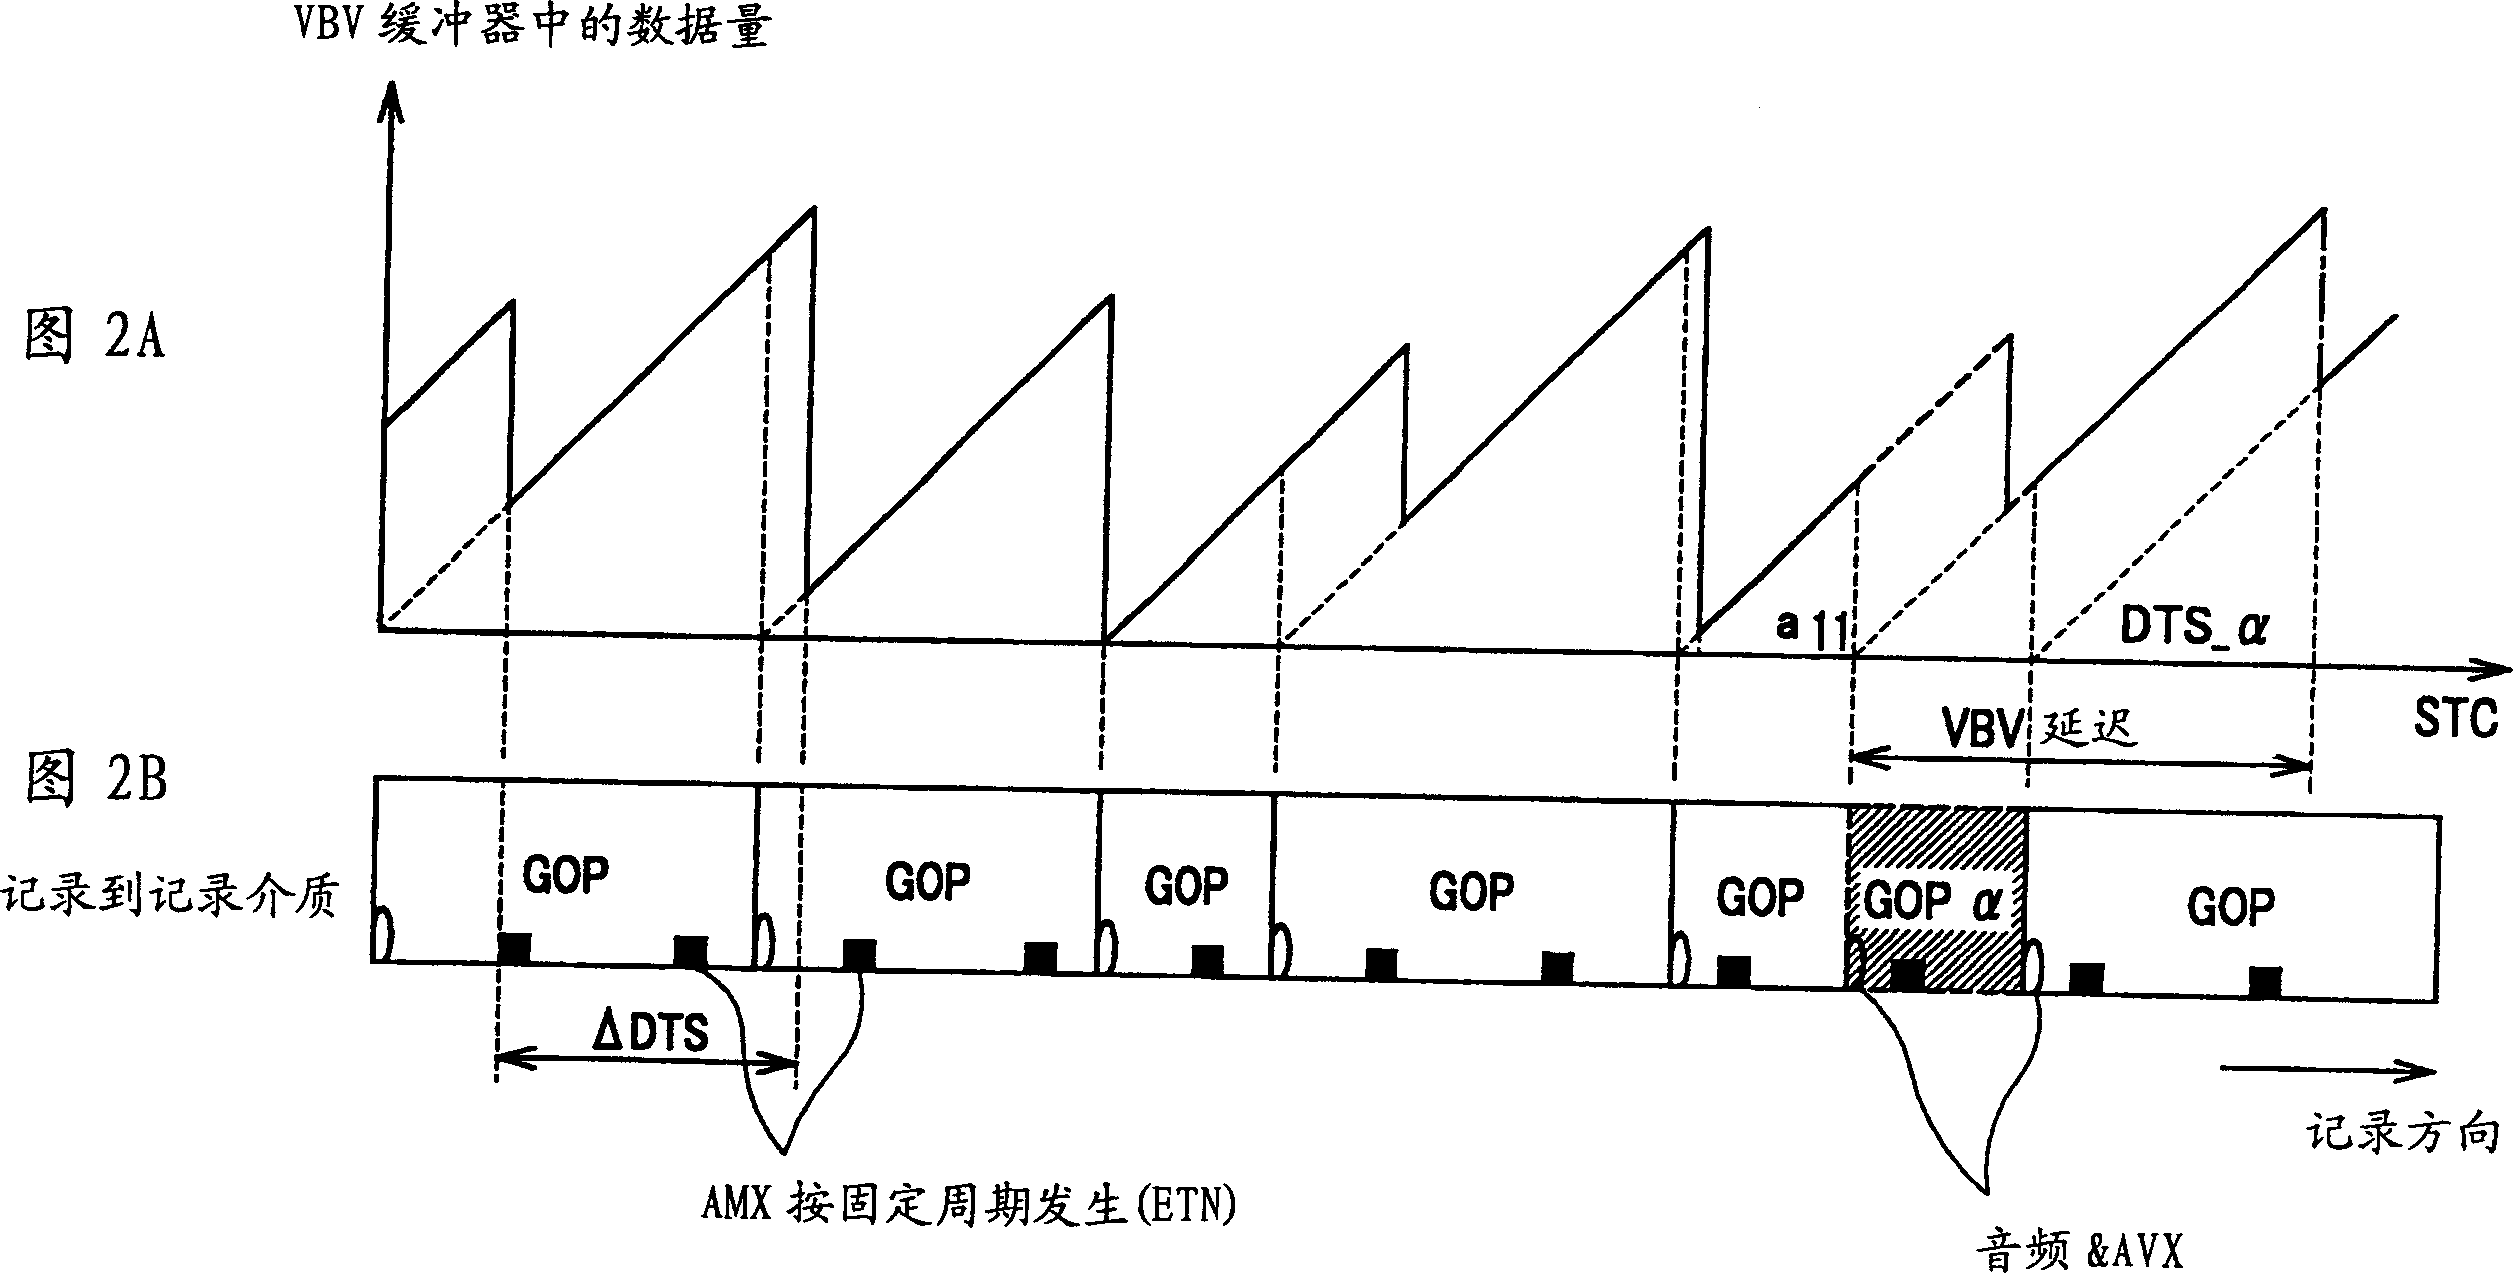 Image data reproducing device and method